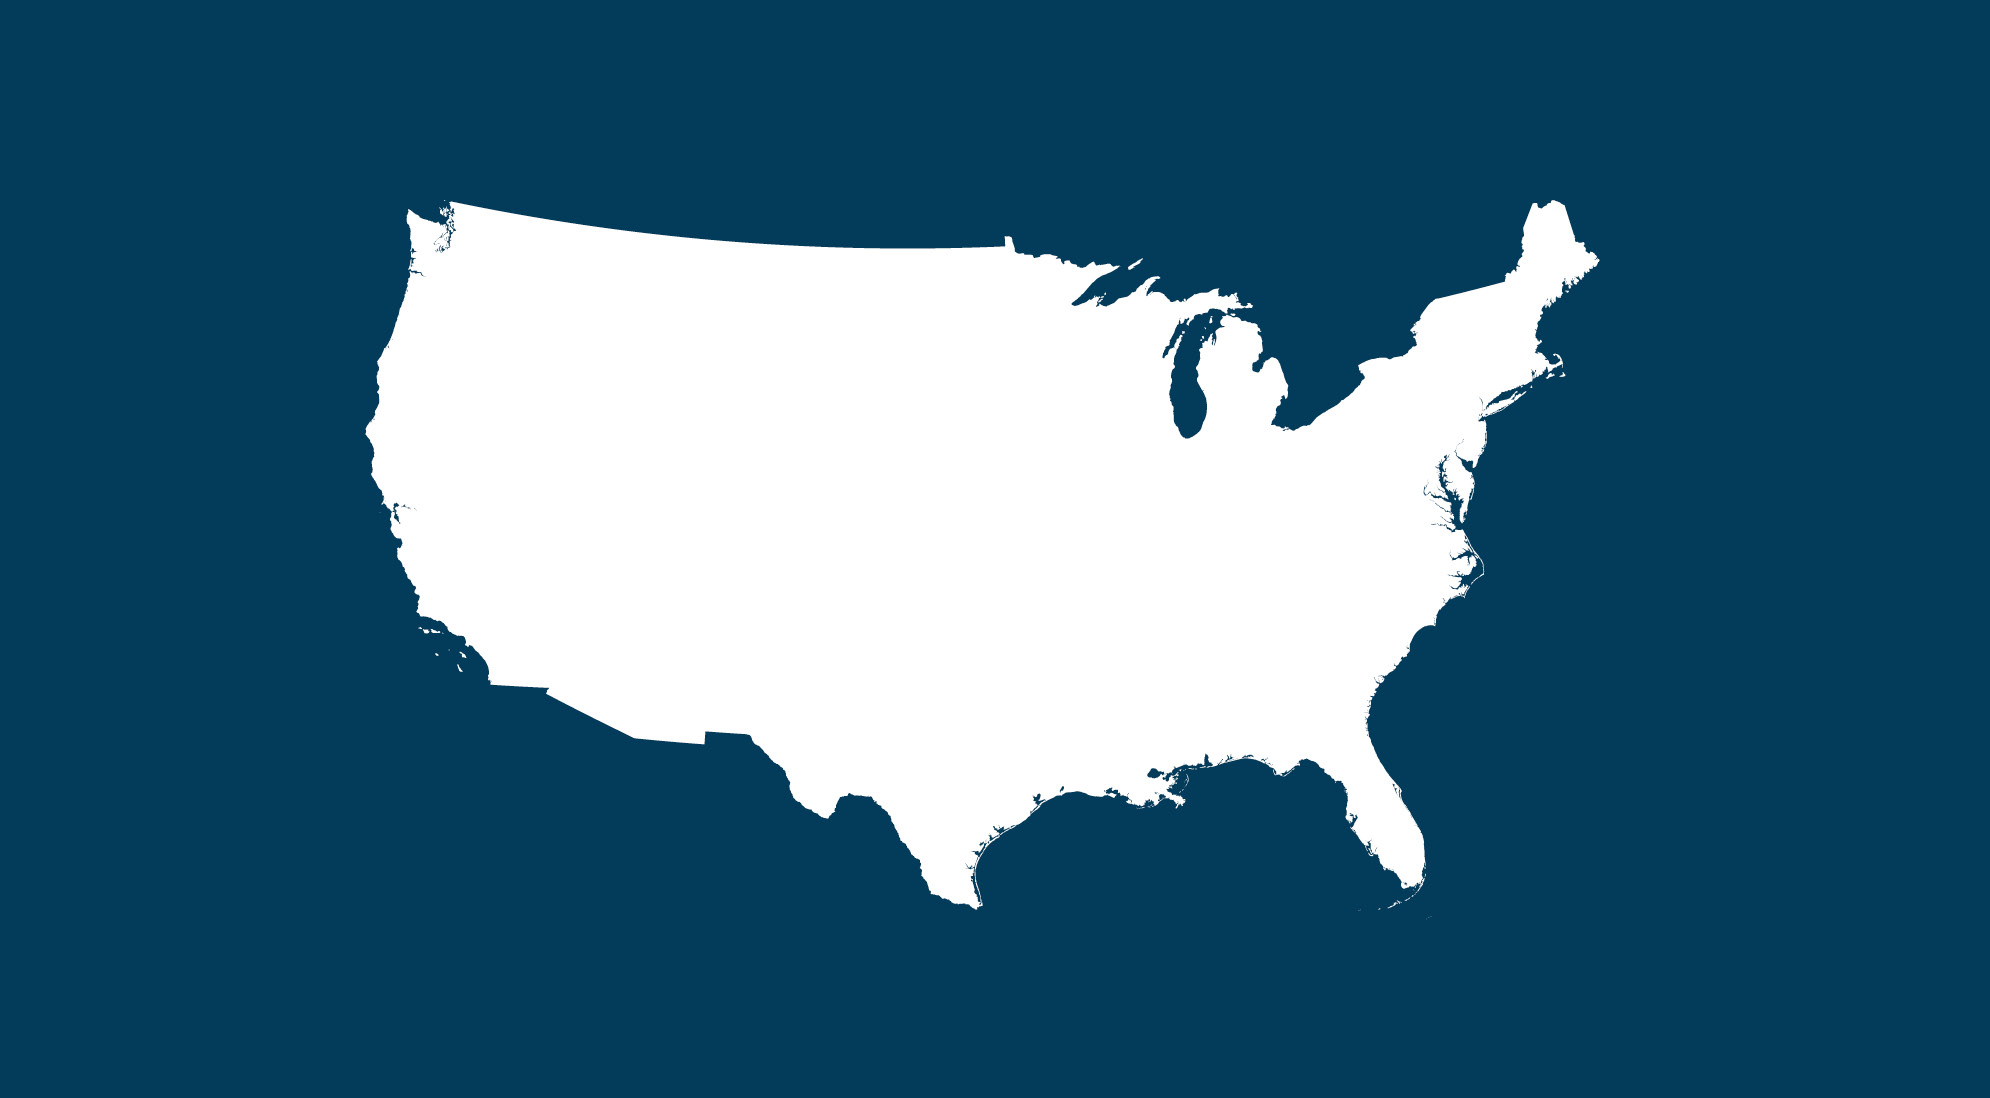 White shape of the United States against a navy background